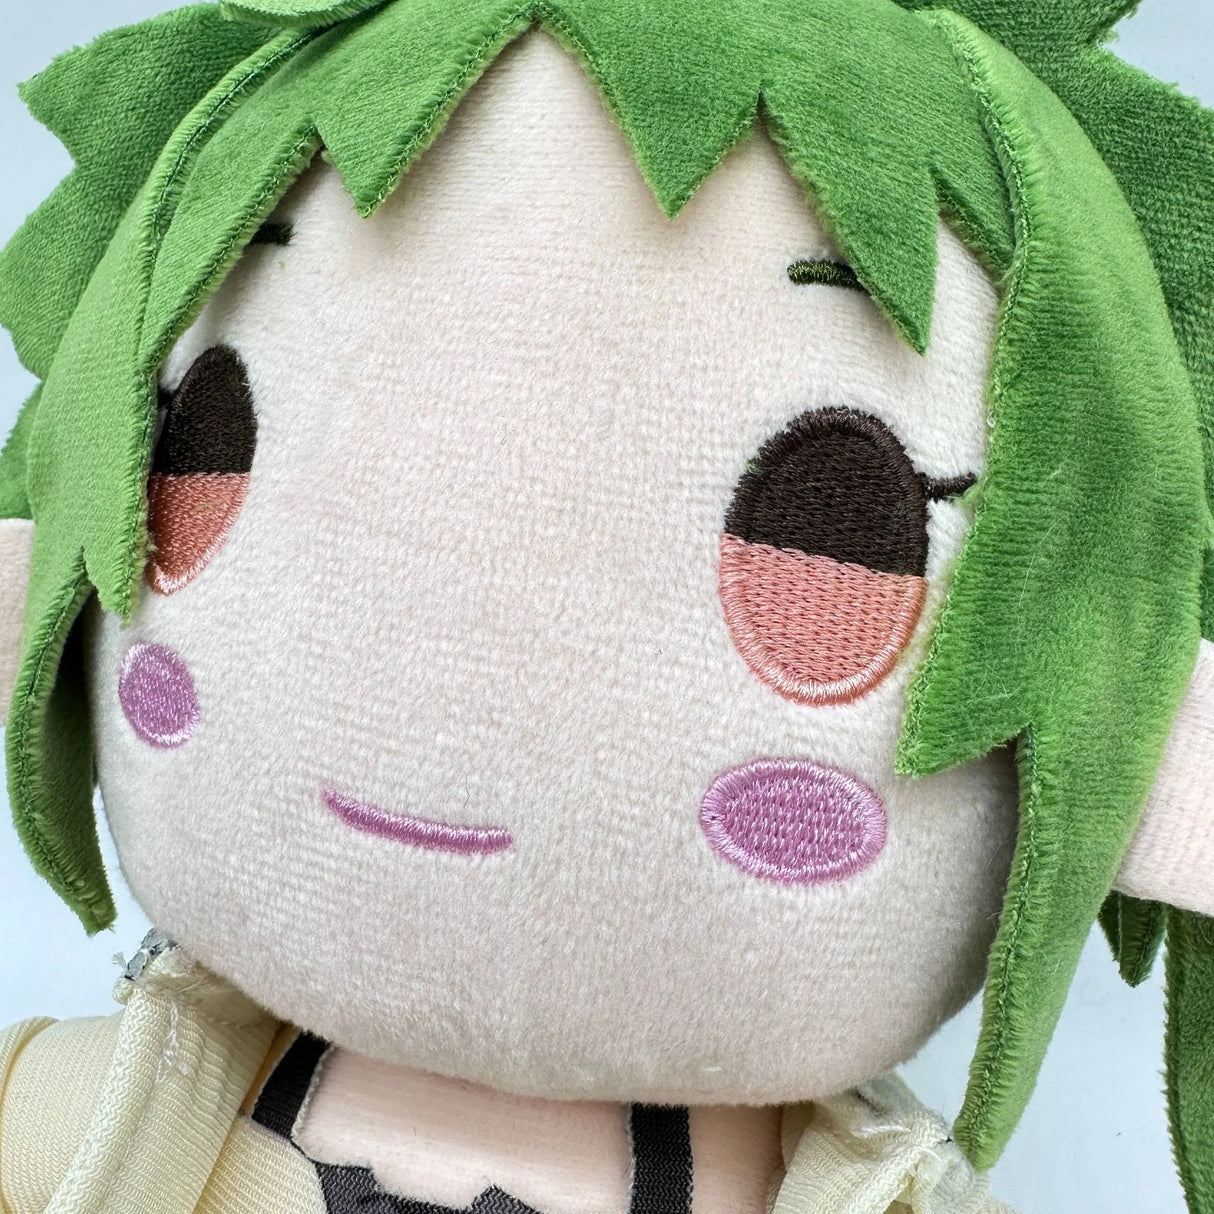 Each plushie handcrafted detail capturing the essence of personalities & charm. If you are looking for more Mushoku Tensei Merch,We have it all!| Check out all our Anime Merch now!